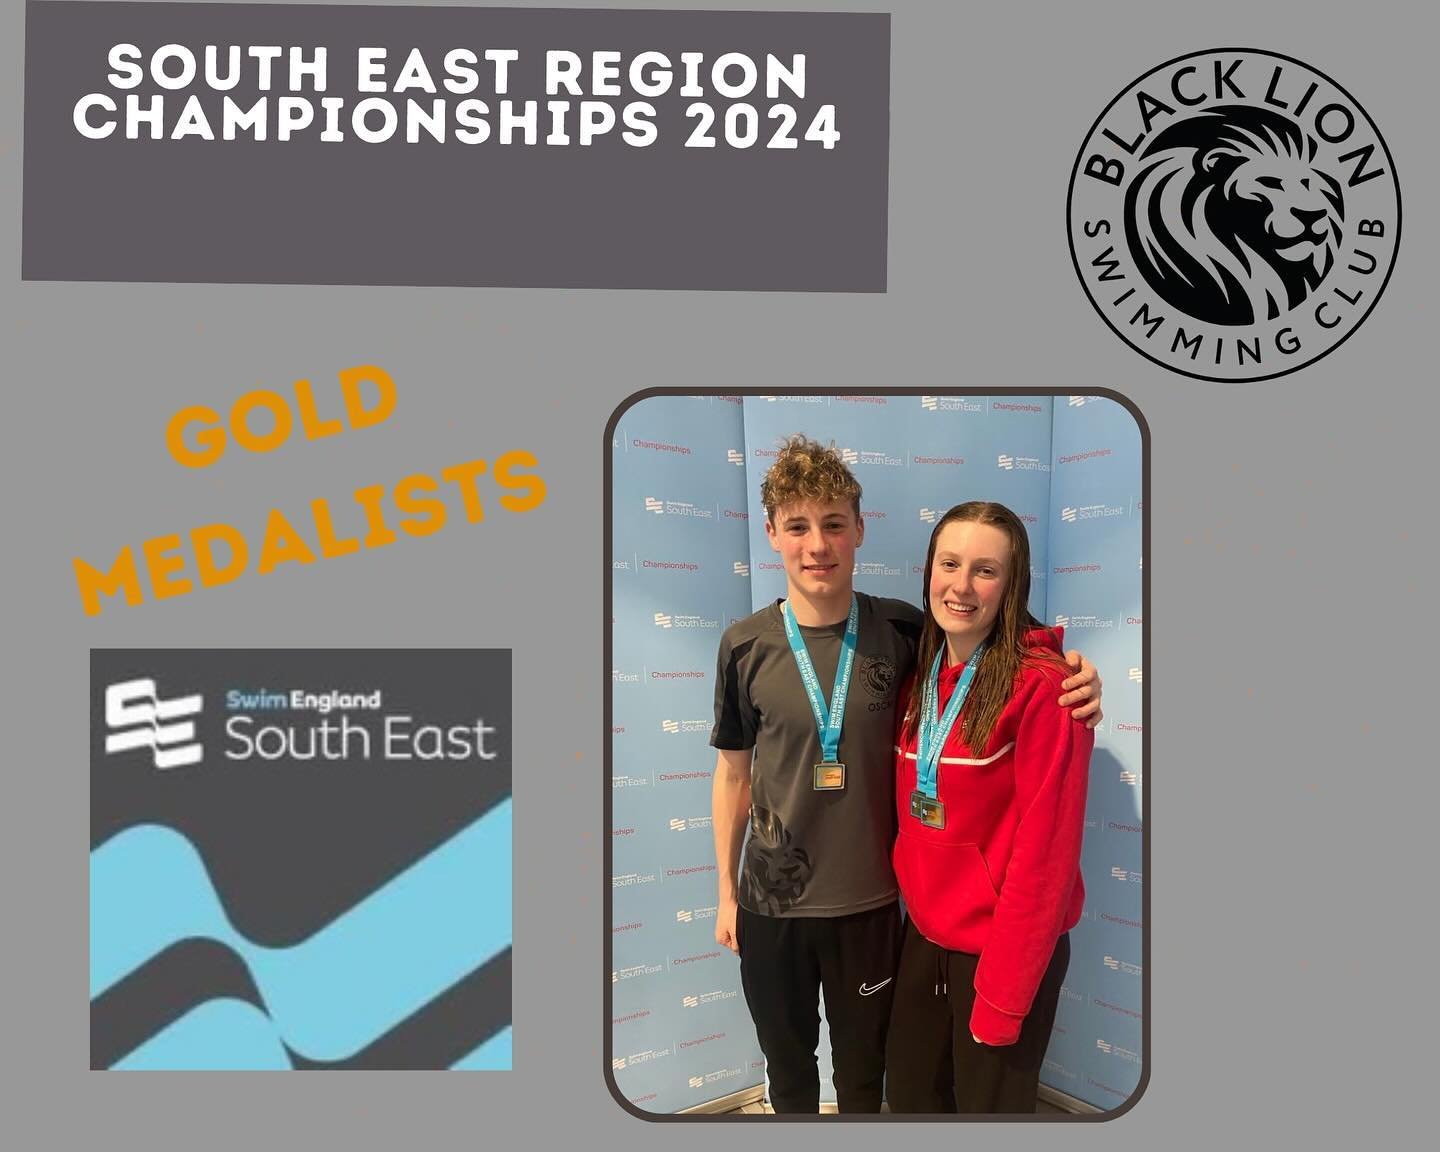 A stunning day 2 at the South East regional Championships saw the Colyers walk away with 3 Gold Medals between them!! 👏🥇🥇🥇 Bravo 🙌 
Kahlen and Abbie both making the finals 💪👏 
Back for sessions 12 and 13 tomorrow 🦁 #competitiveswimming #compe